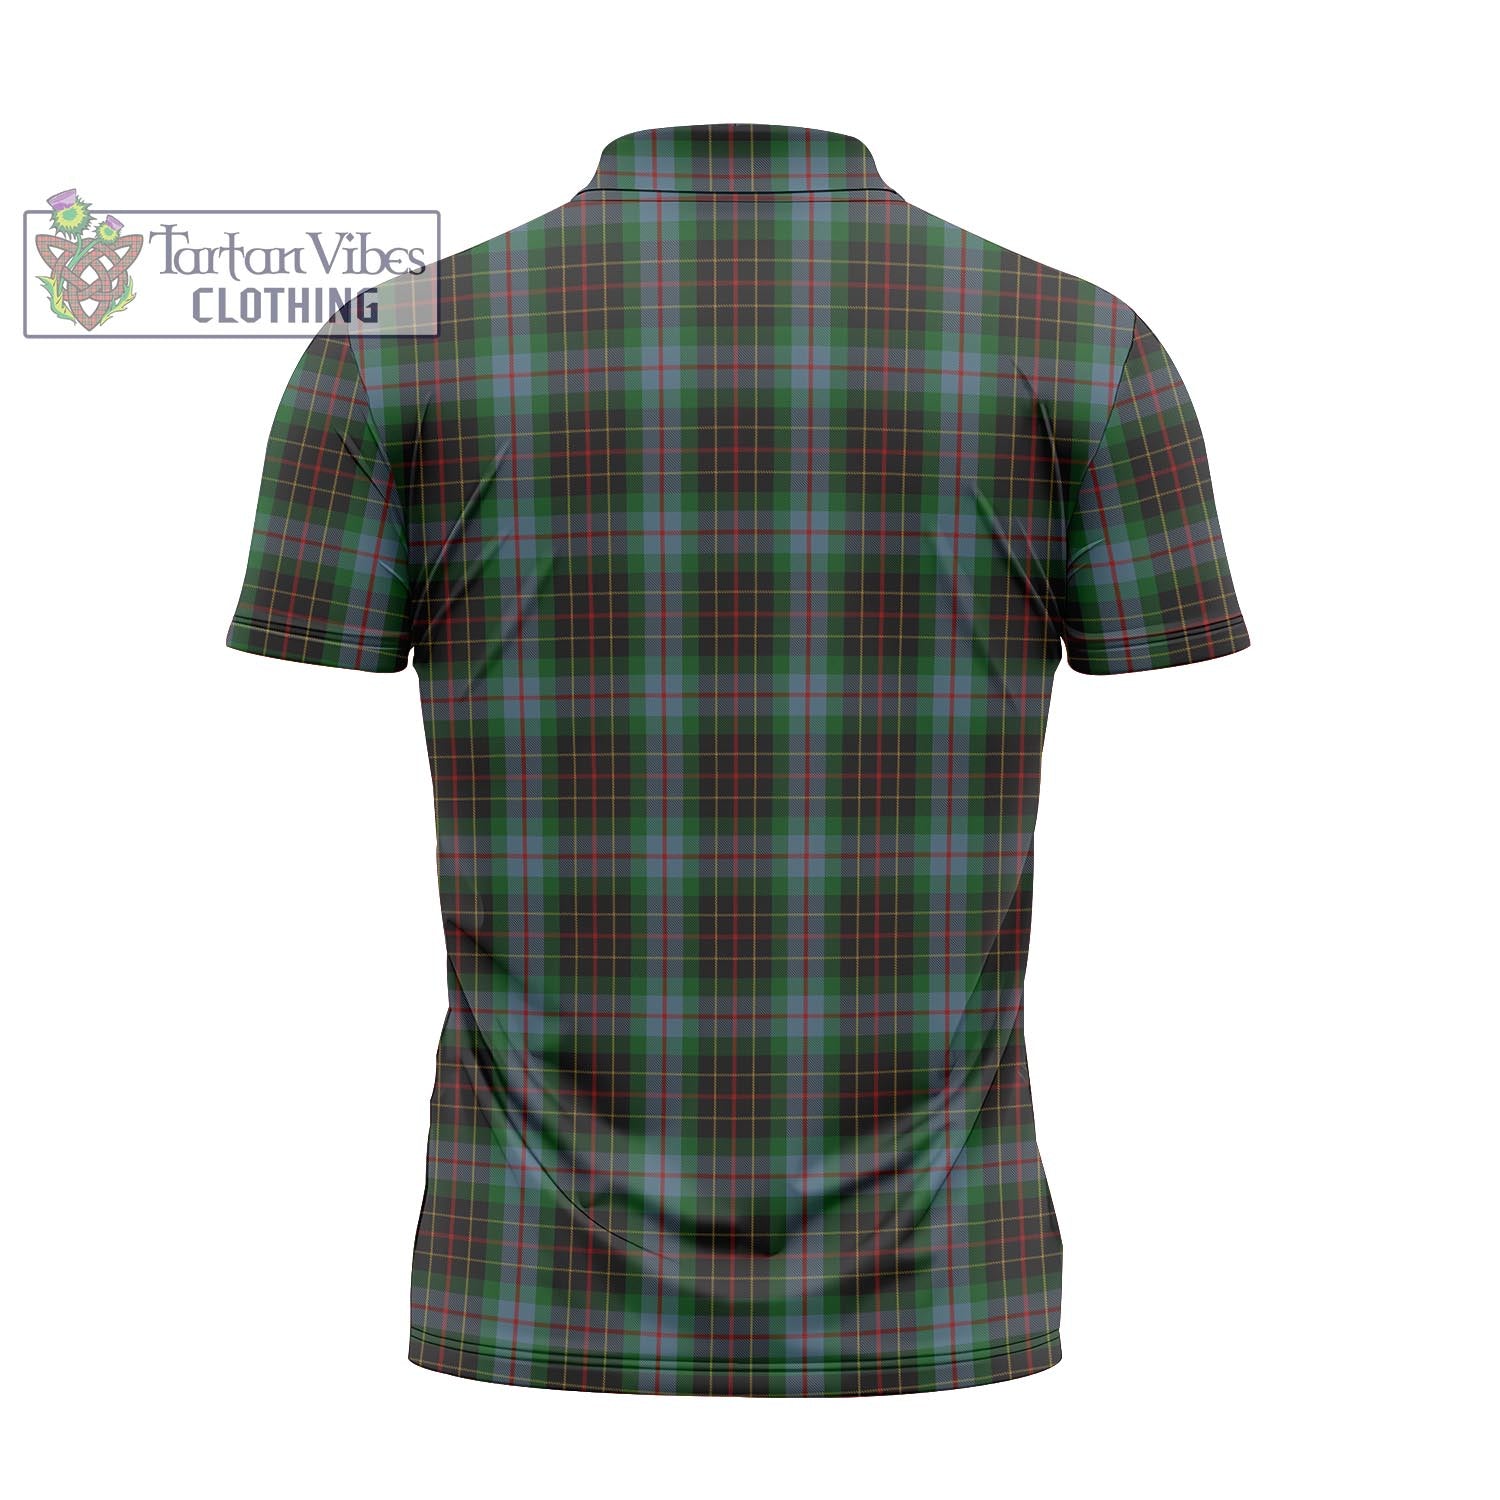 Tartan Vibes Clothing Brodie Hunting Tartan Zipper Polo Shirt with Family Crest